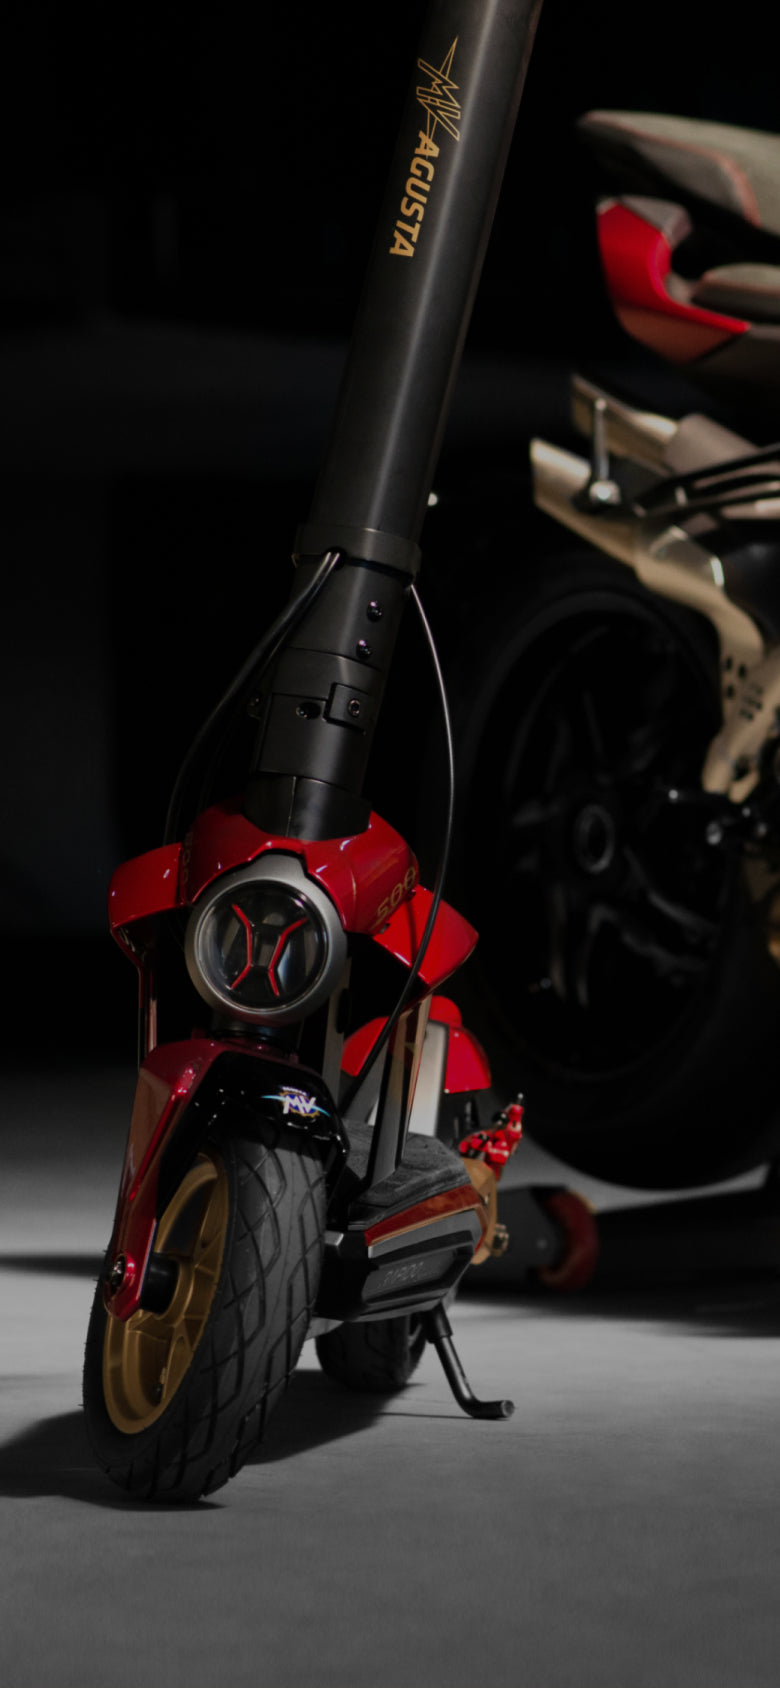 Inspired by the iconic MV Agusta motorcycles